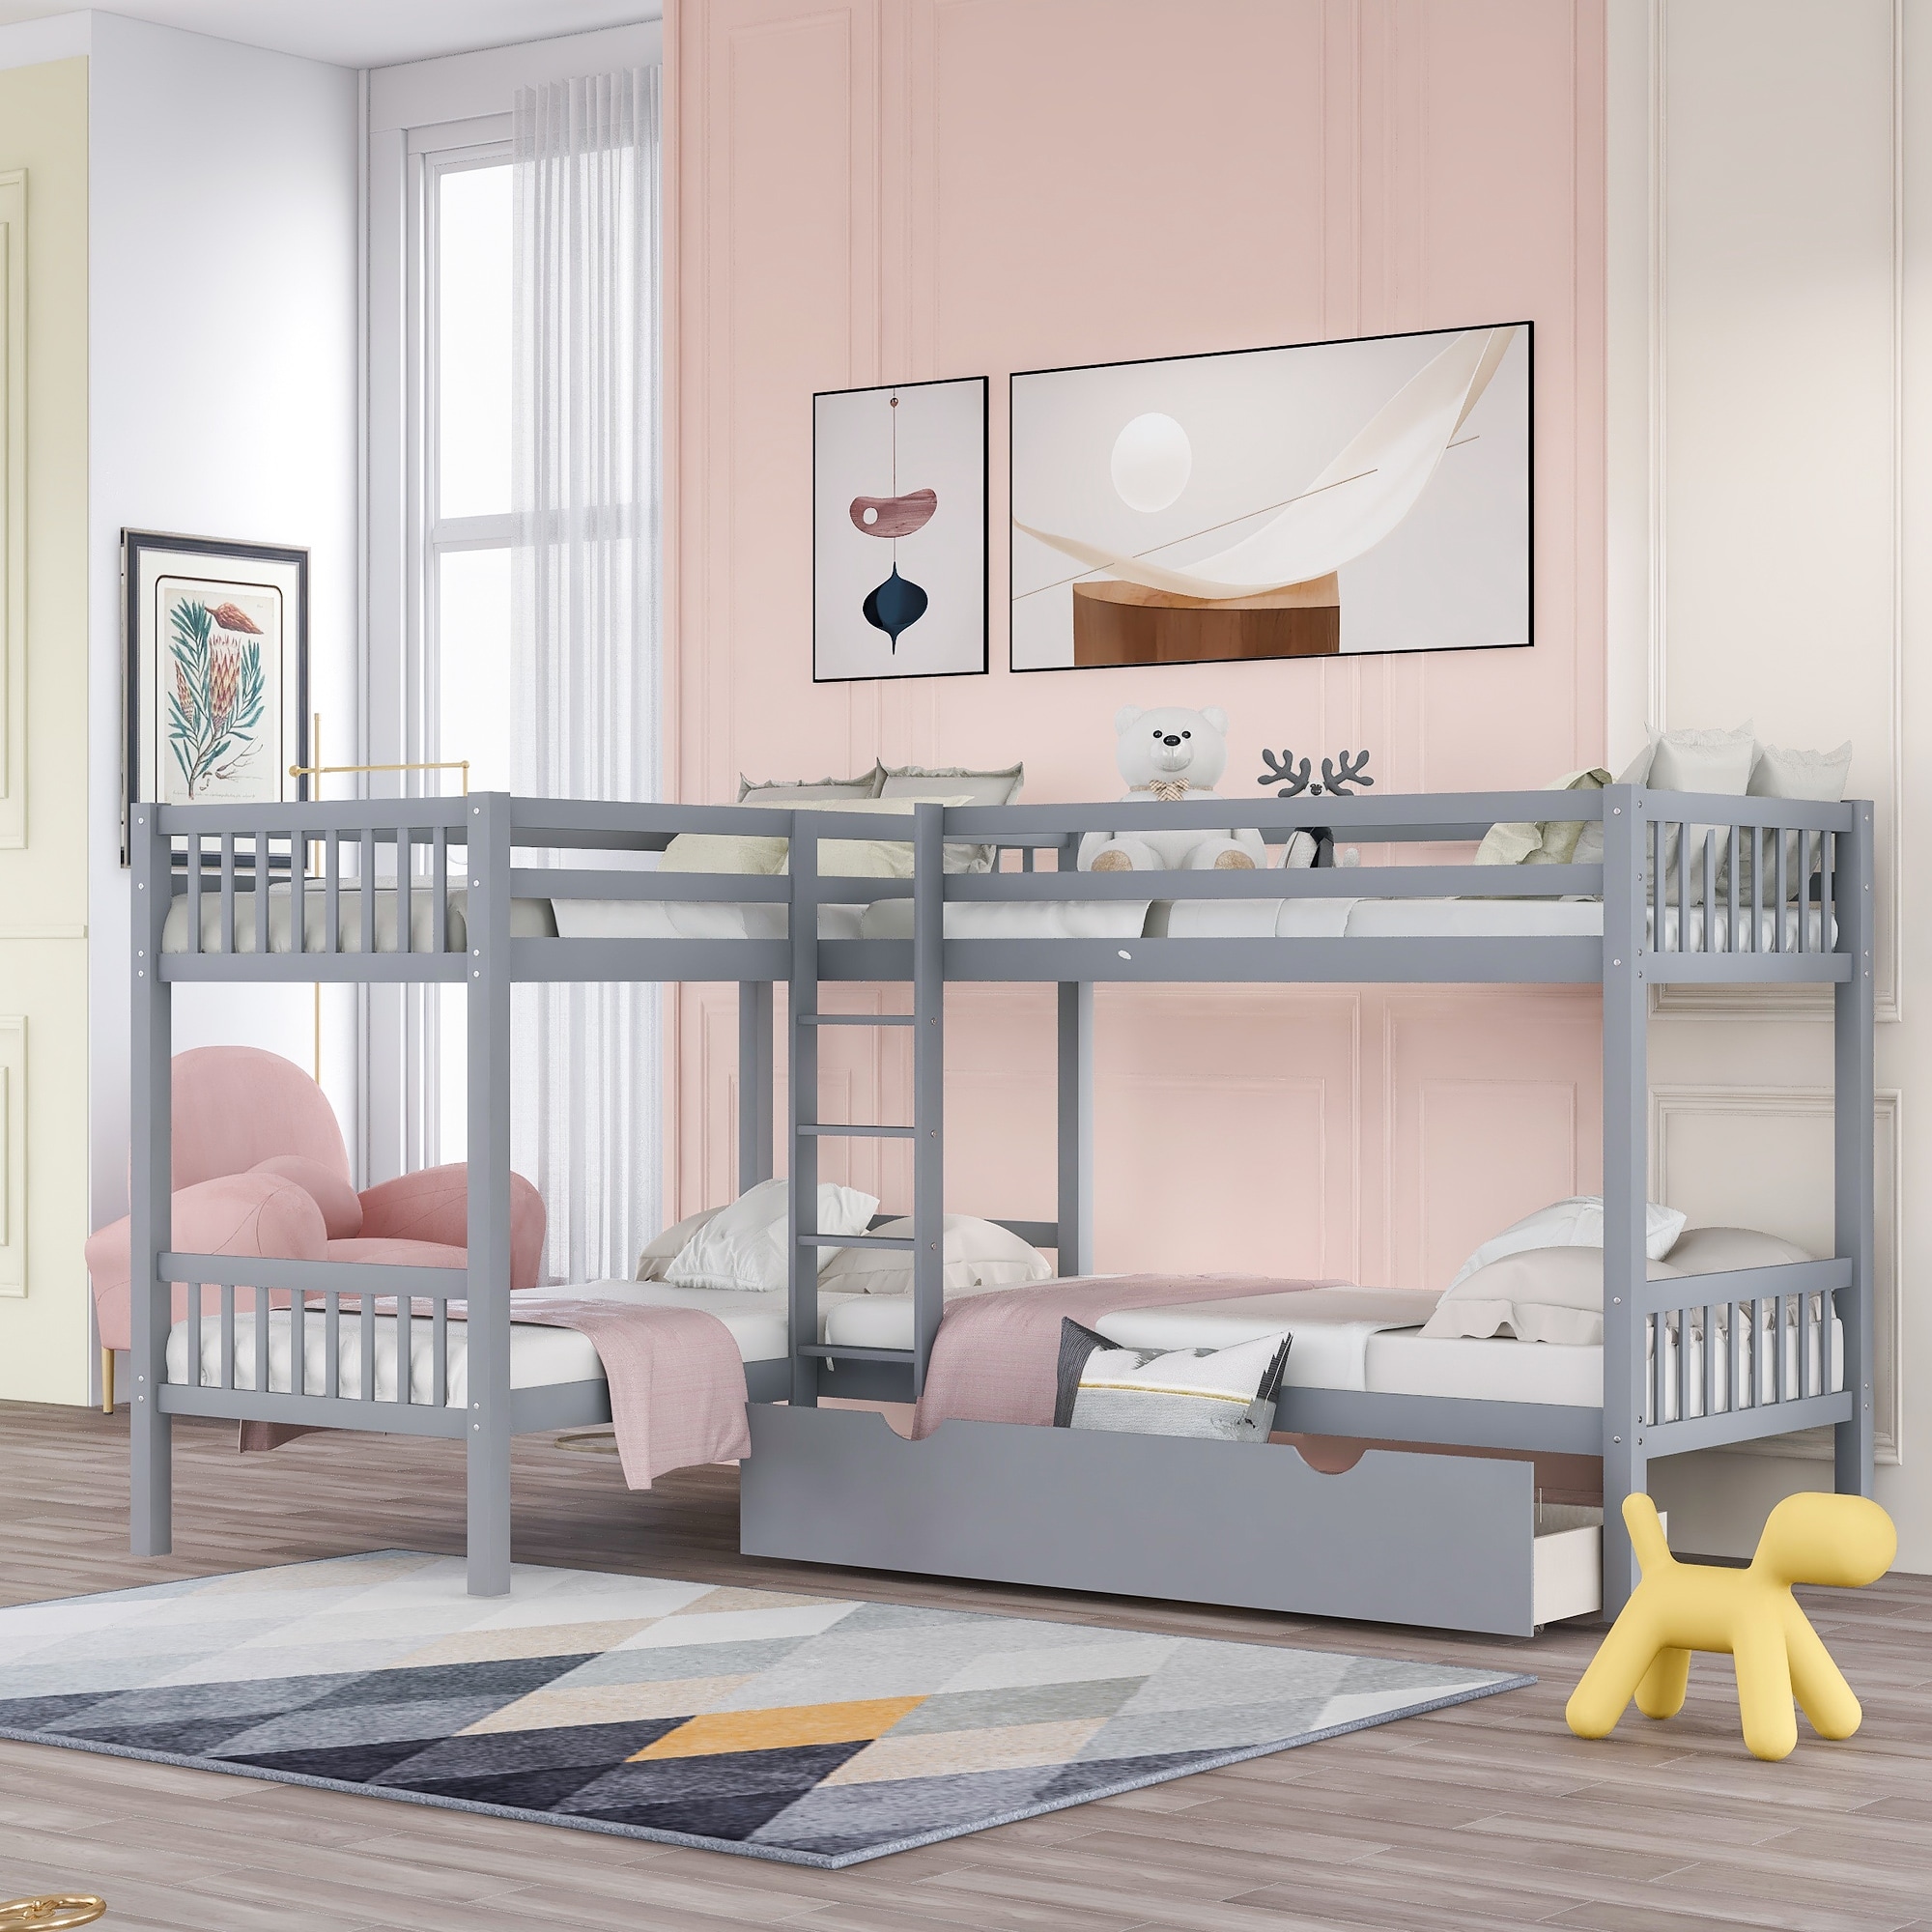 https://ak1.ostkcdn.com/images/products/is/images/direct/0e3cf61541bd975aa501e8b6ad179e0729f3bd1d/Twin-Over-Twin-Bunk-Bed-for-4%2C-L-Shaped-Bunk-Beds-Wooden-Bunk-Bed-Frame-with-Storage-Drawers-%26-Guardrails%2C-No-Box-Spring-Needed.jpg